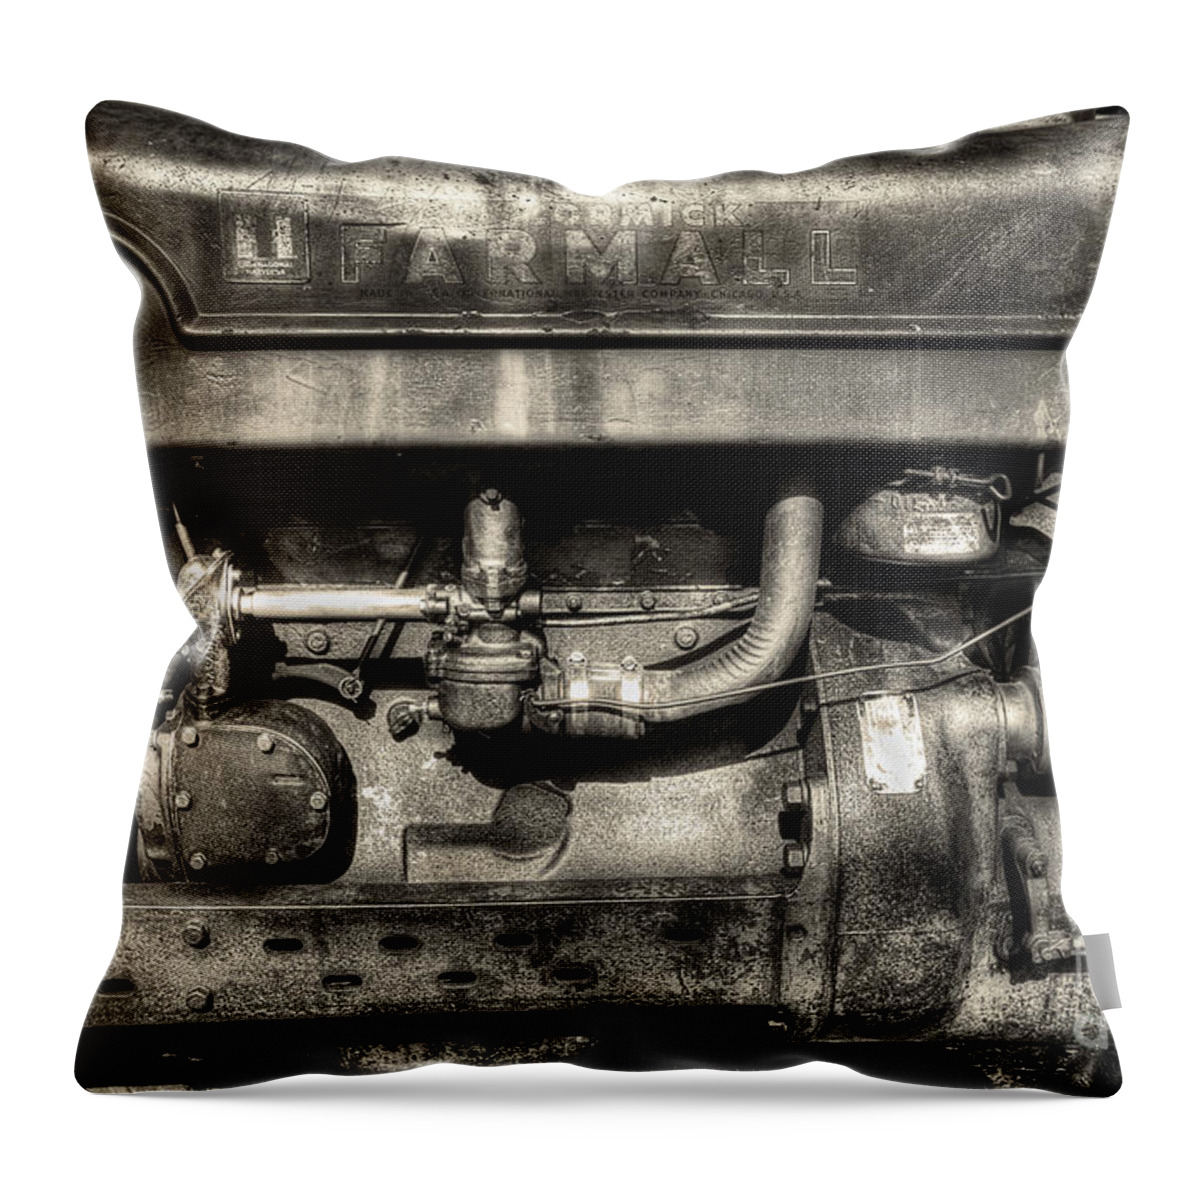 Tractor Engine Throw Pillow featuring the photograph Antique Farmall Engine by Mike Eingle